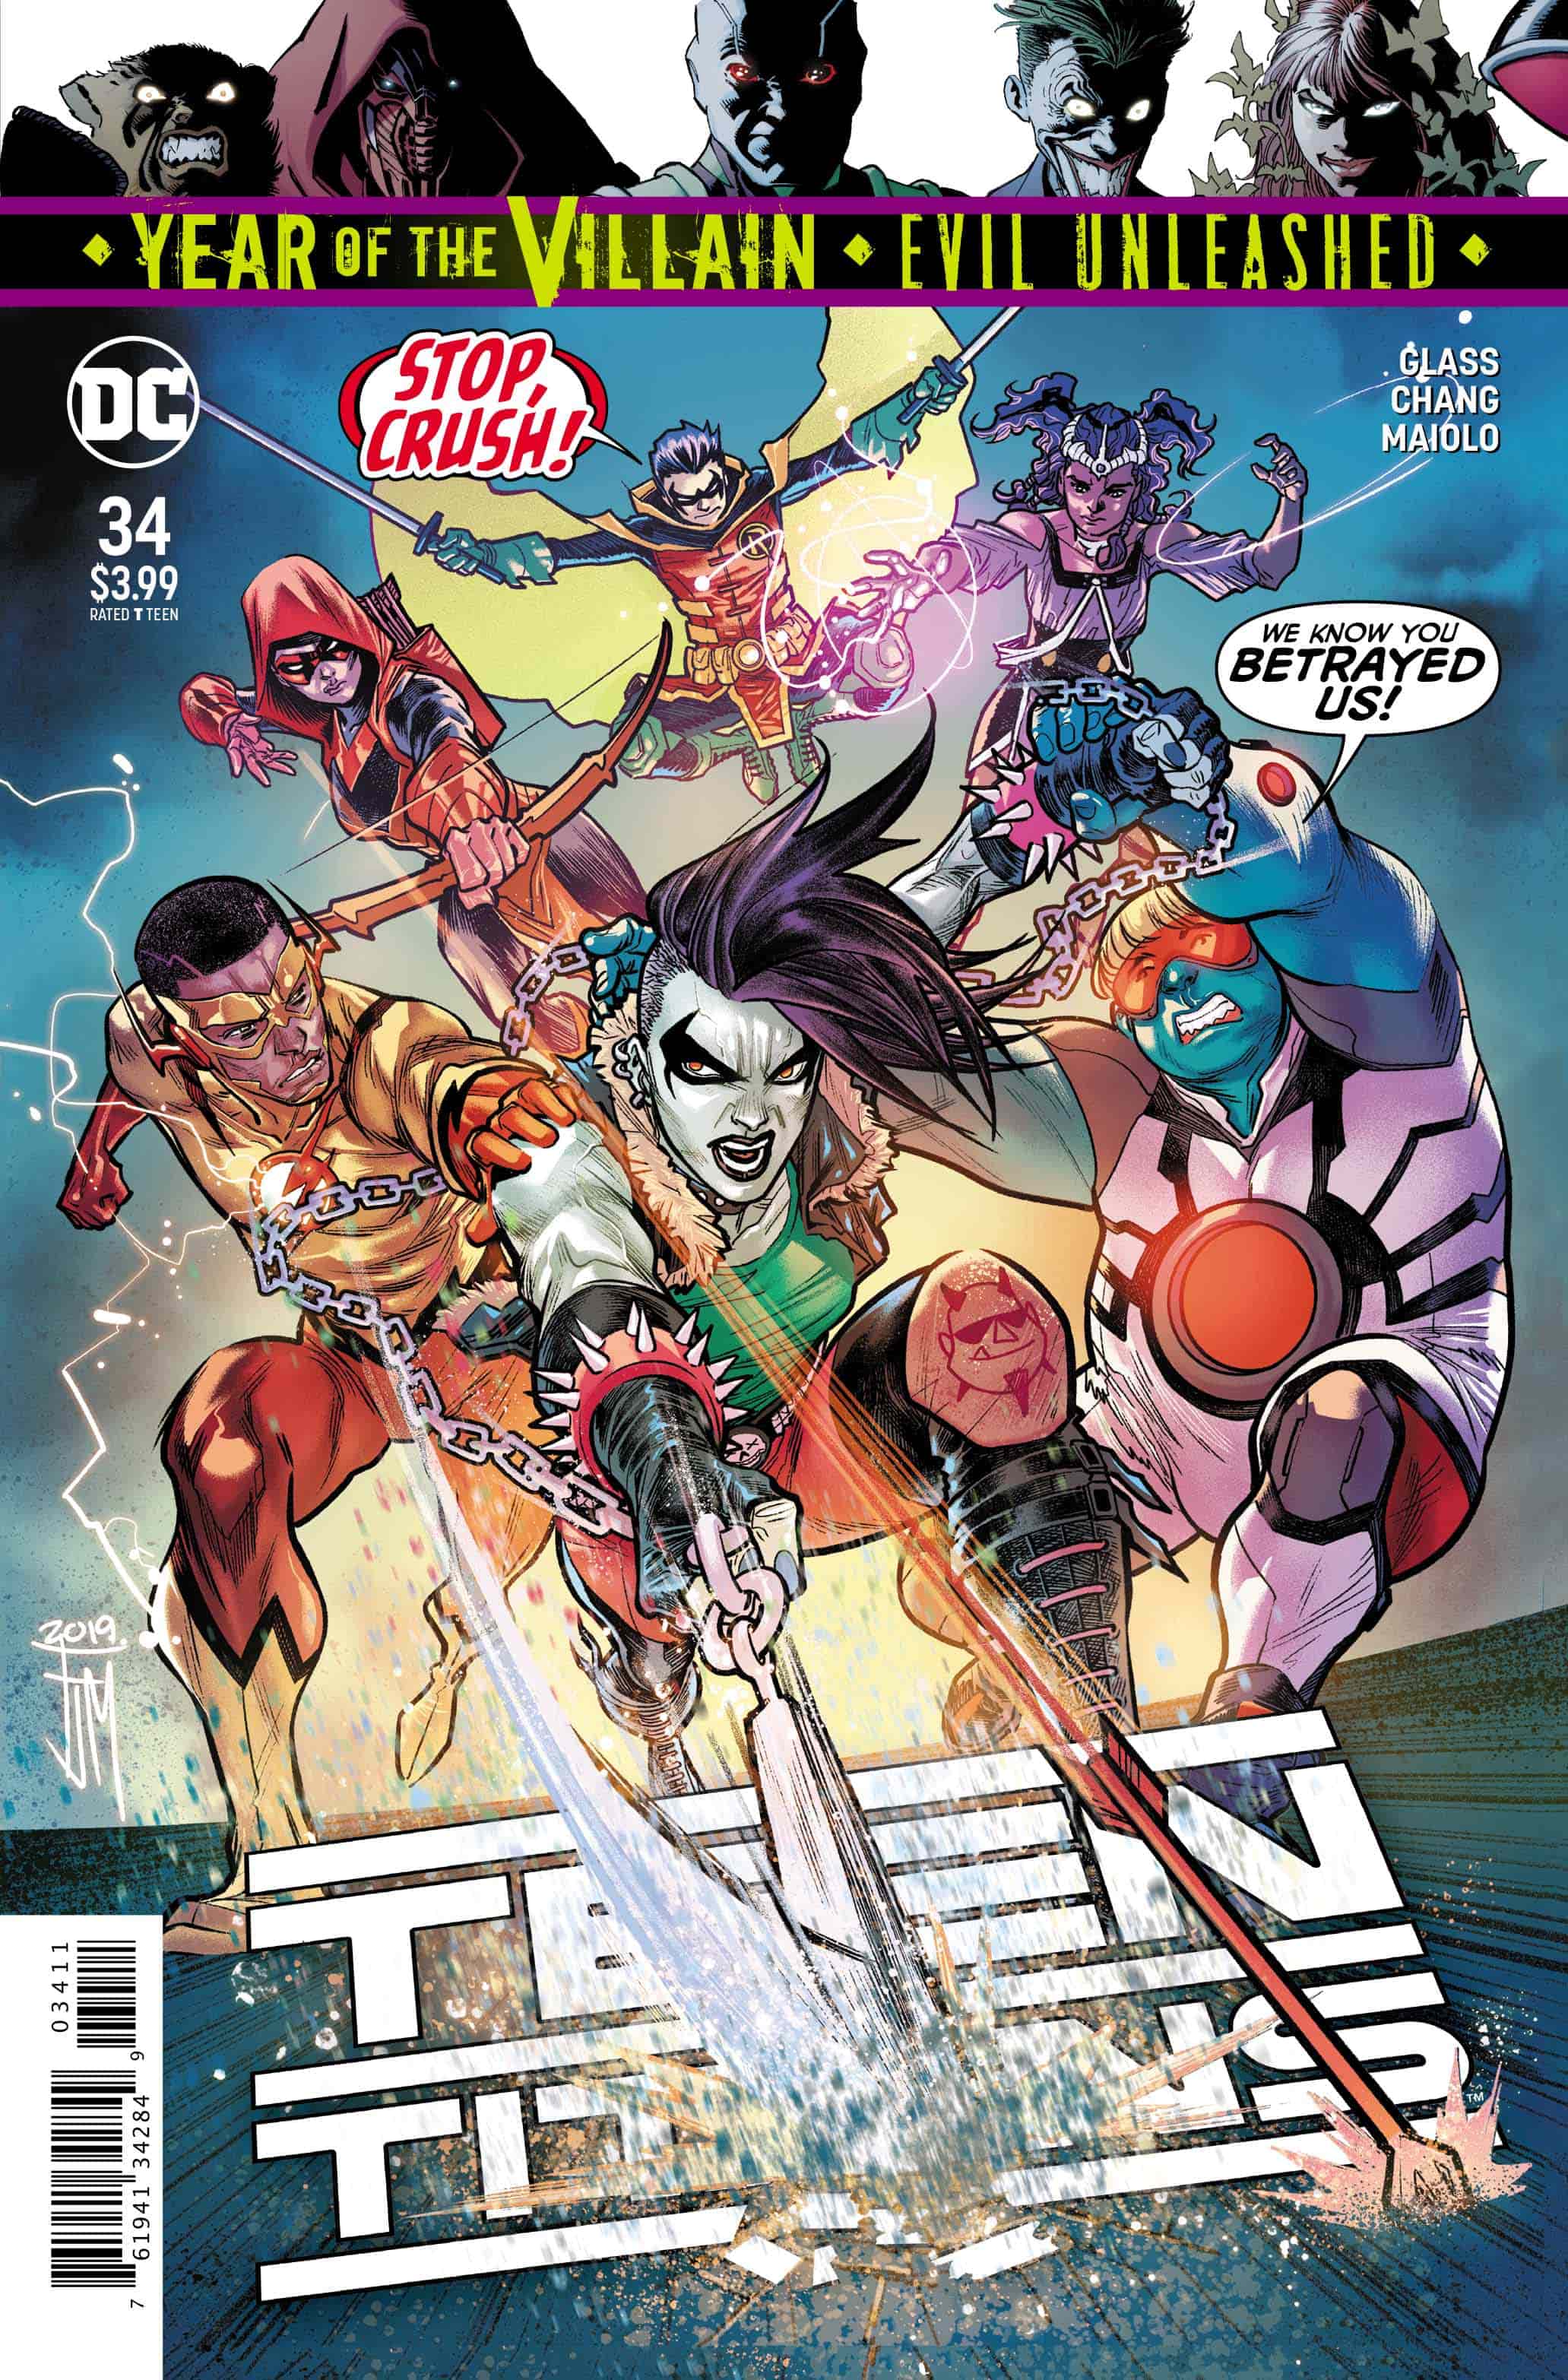 Teen Titans #34 Review